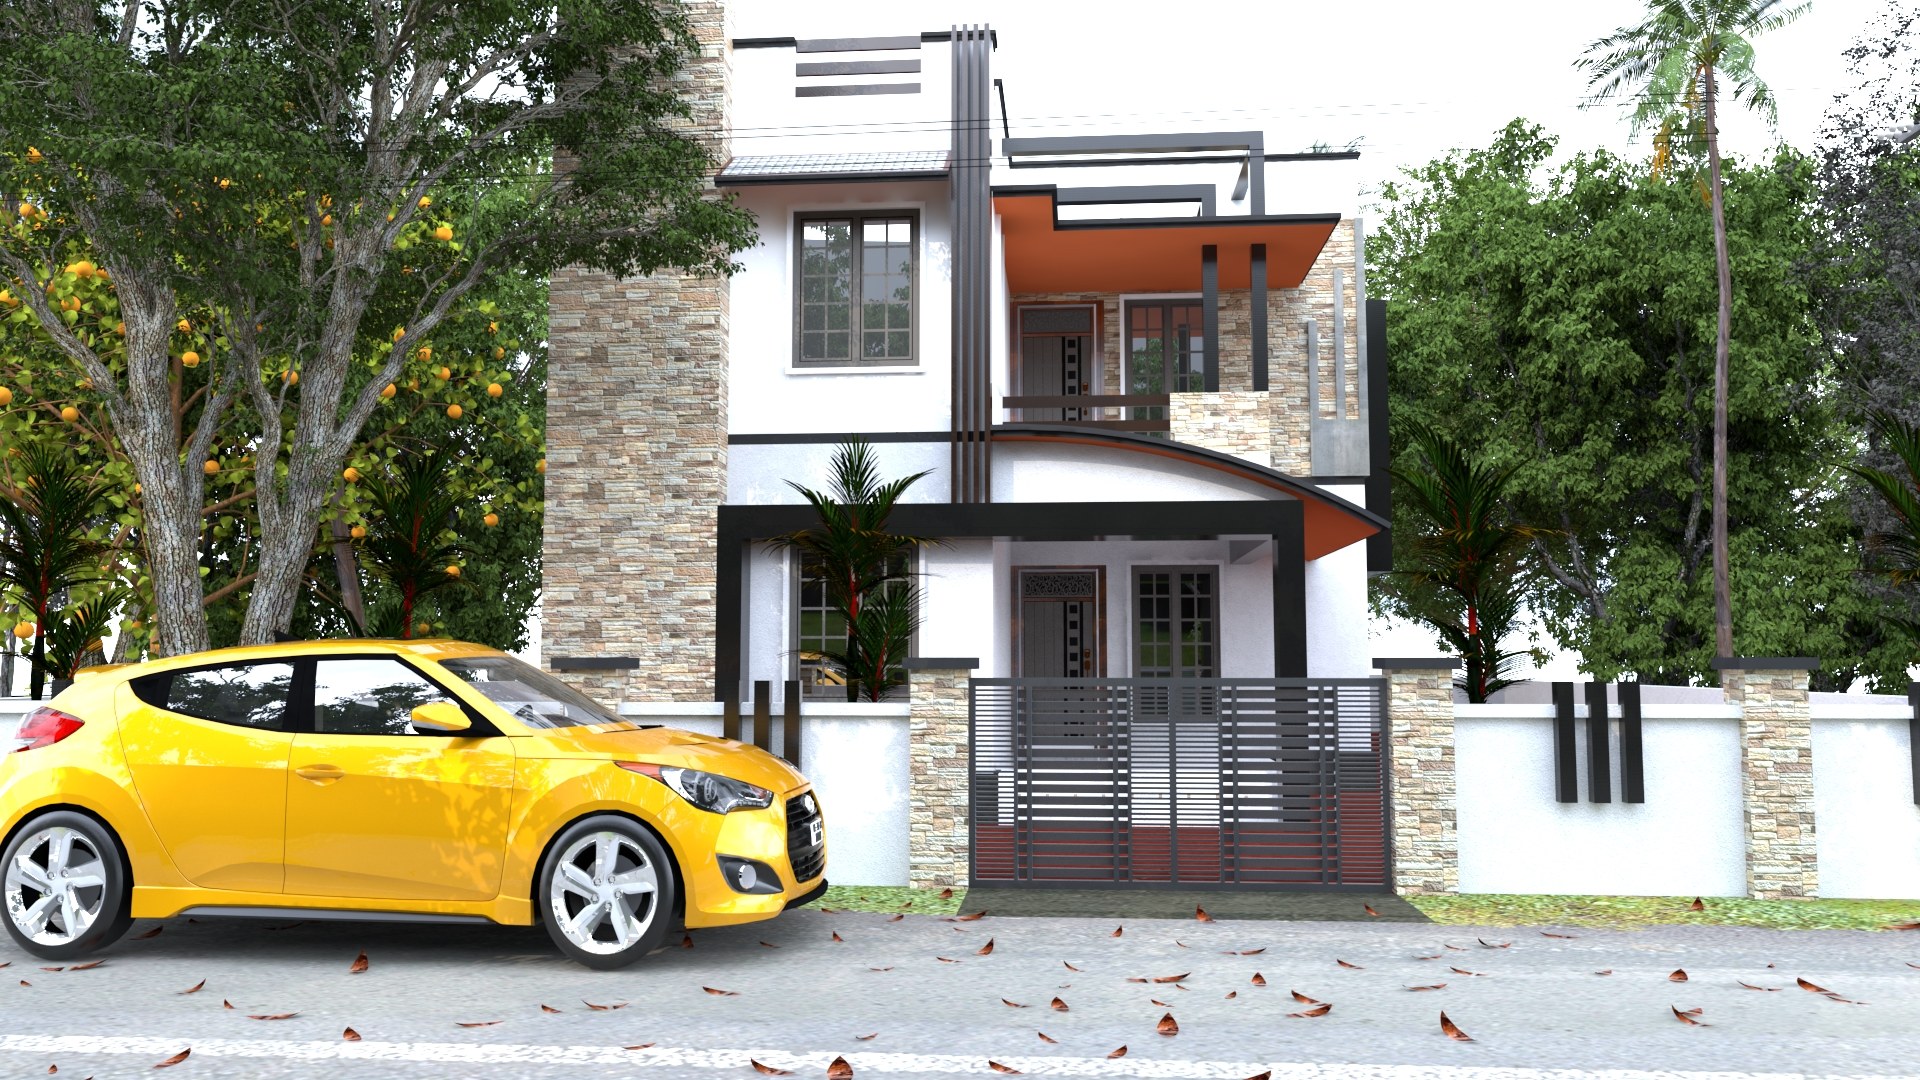 Home project Front View - Vray 3.6 render